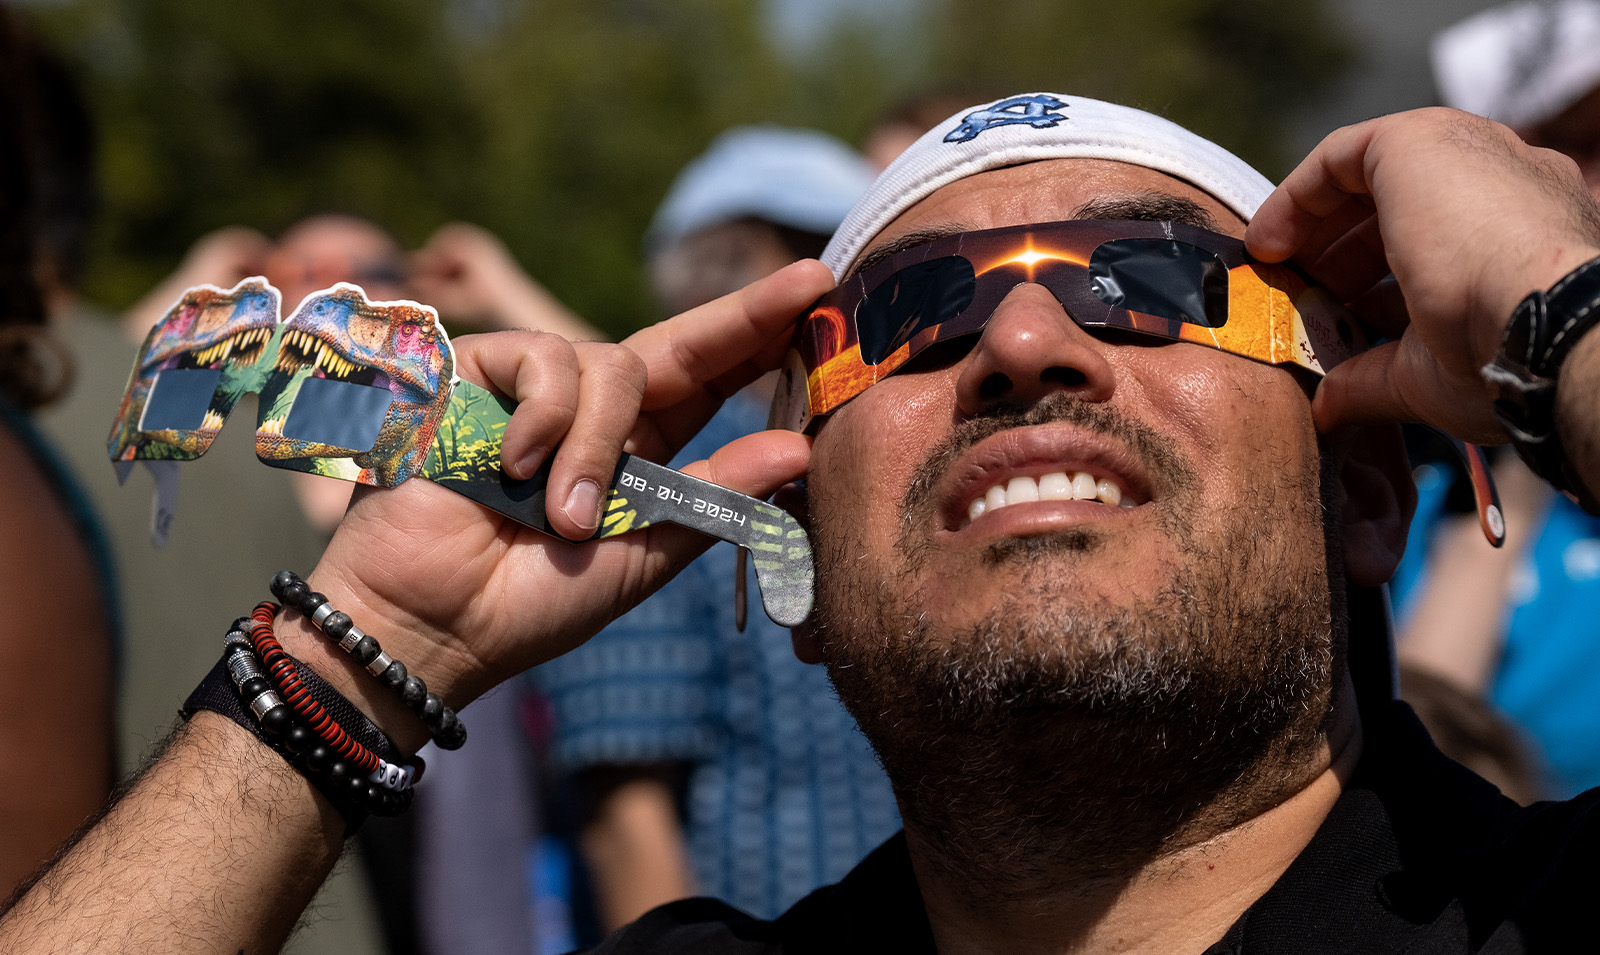 A man looking up a solar eclipse while wearing safety sunglasses.